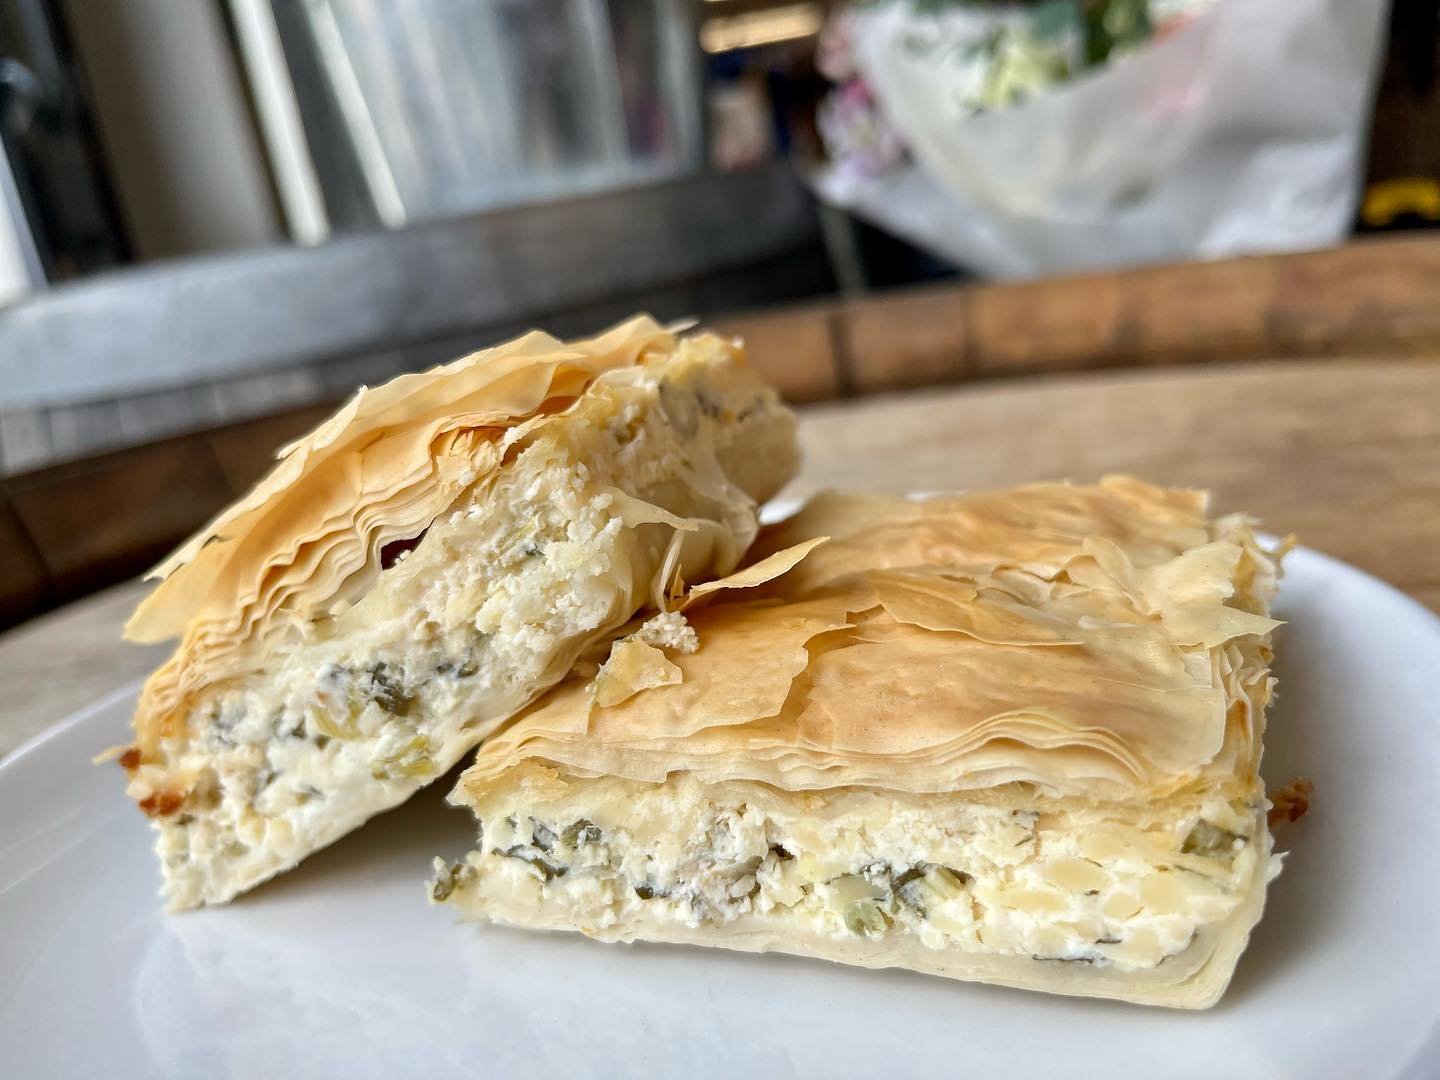 NEW deli item alert! 😋 This photogenic beauty  is none other than Tiropita- a decadent, creamy fan favorite Greek pastry! Made of crispy, flaky phyllo dough slathered in herbed cheese filling! Treat yourself to one of these Mediterranean marvels as 